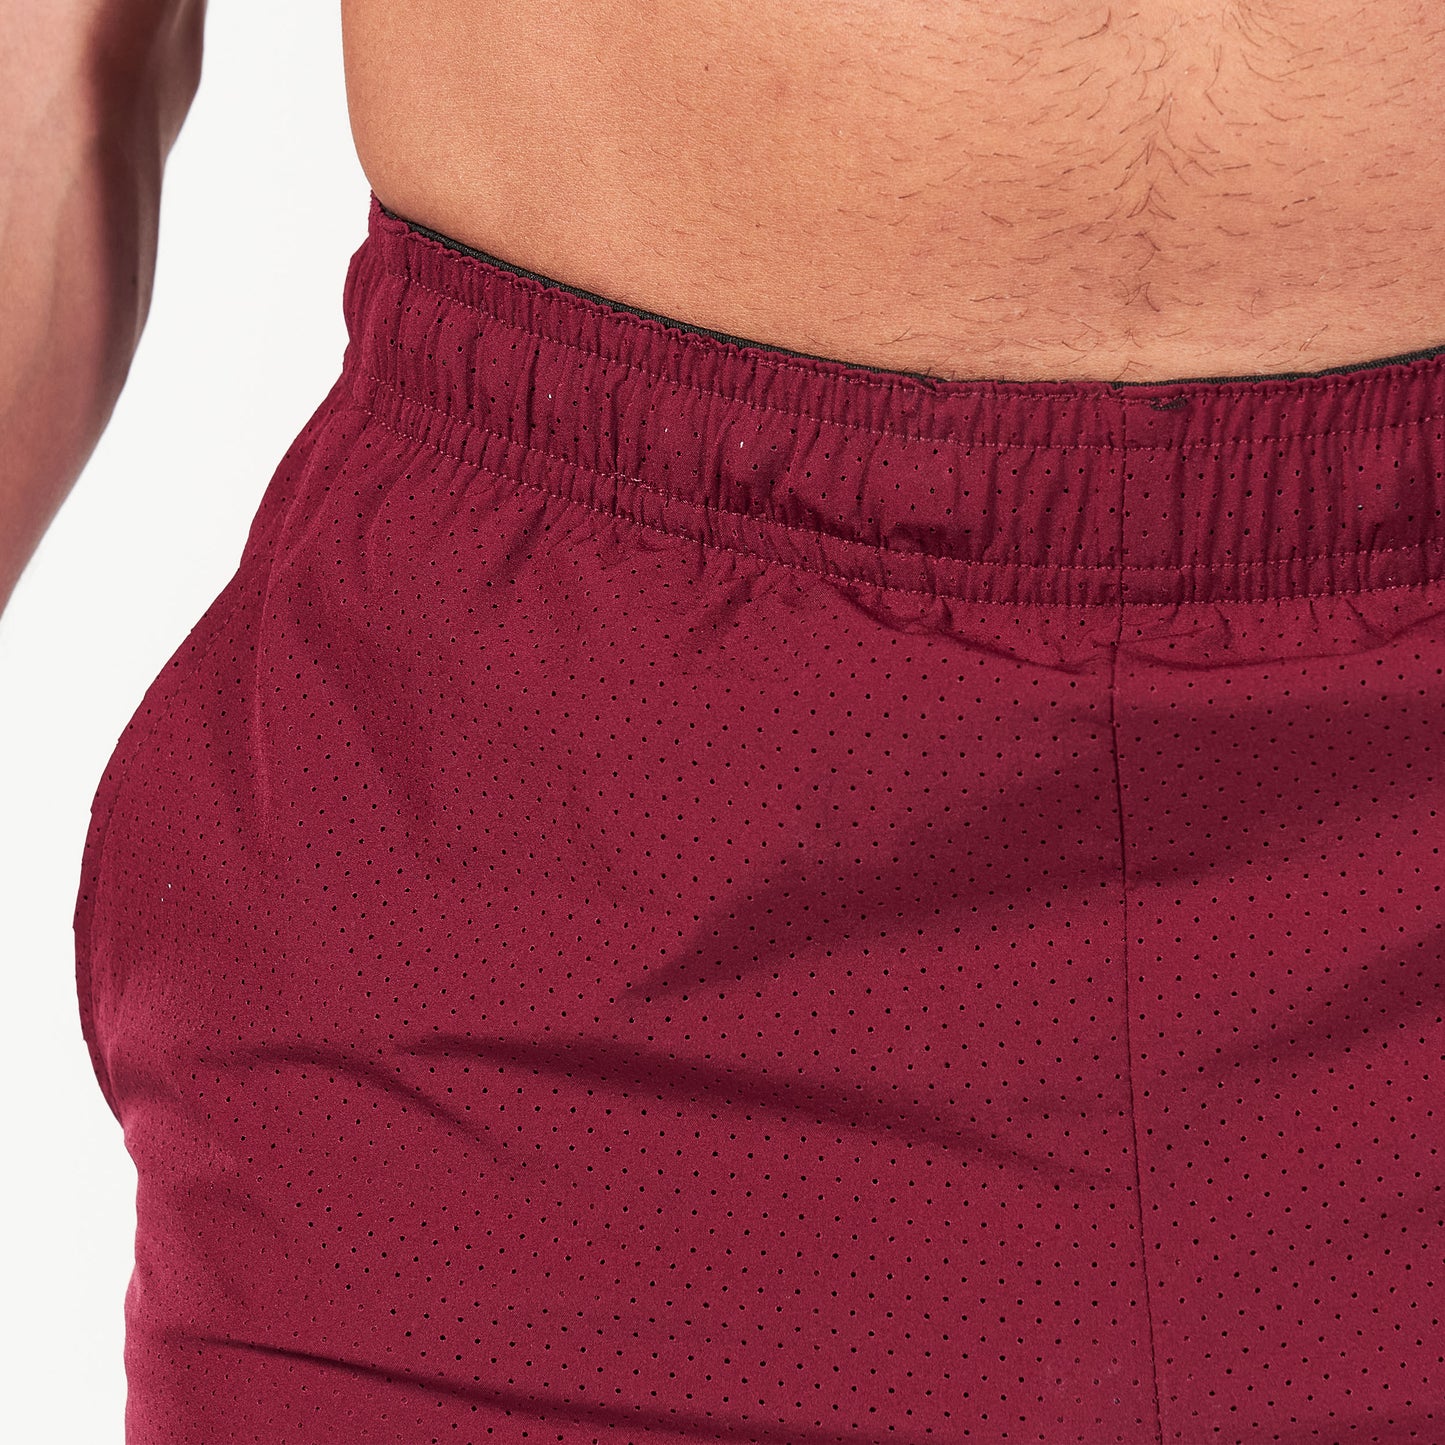 squatwolf-gym-wear-2-in-1-dry-tech-shorts-maroon-workout-short-for-men